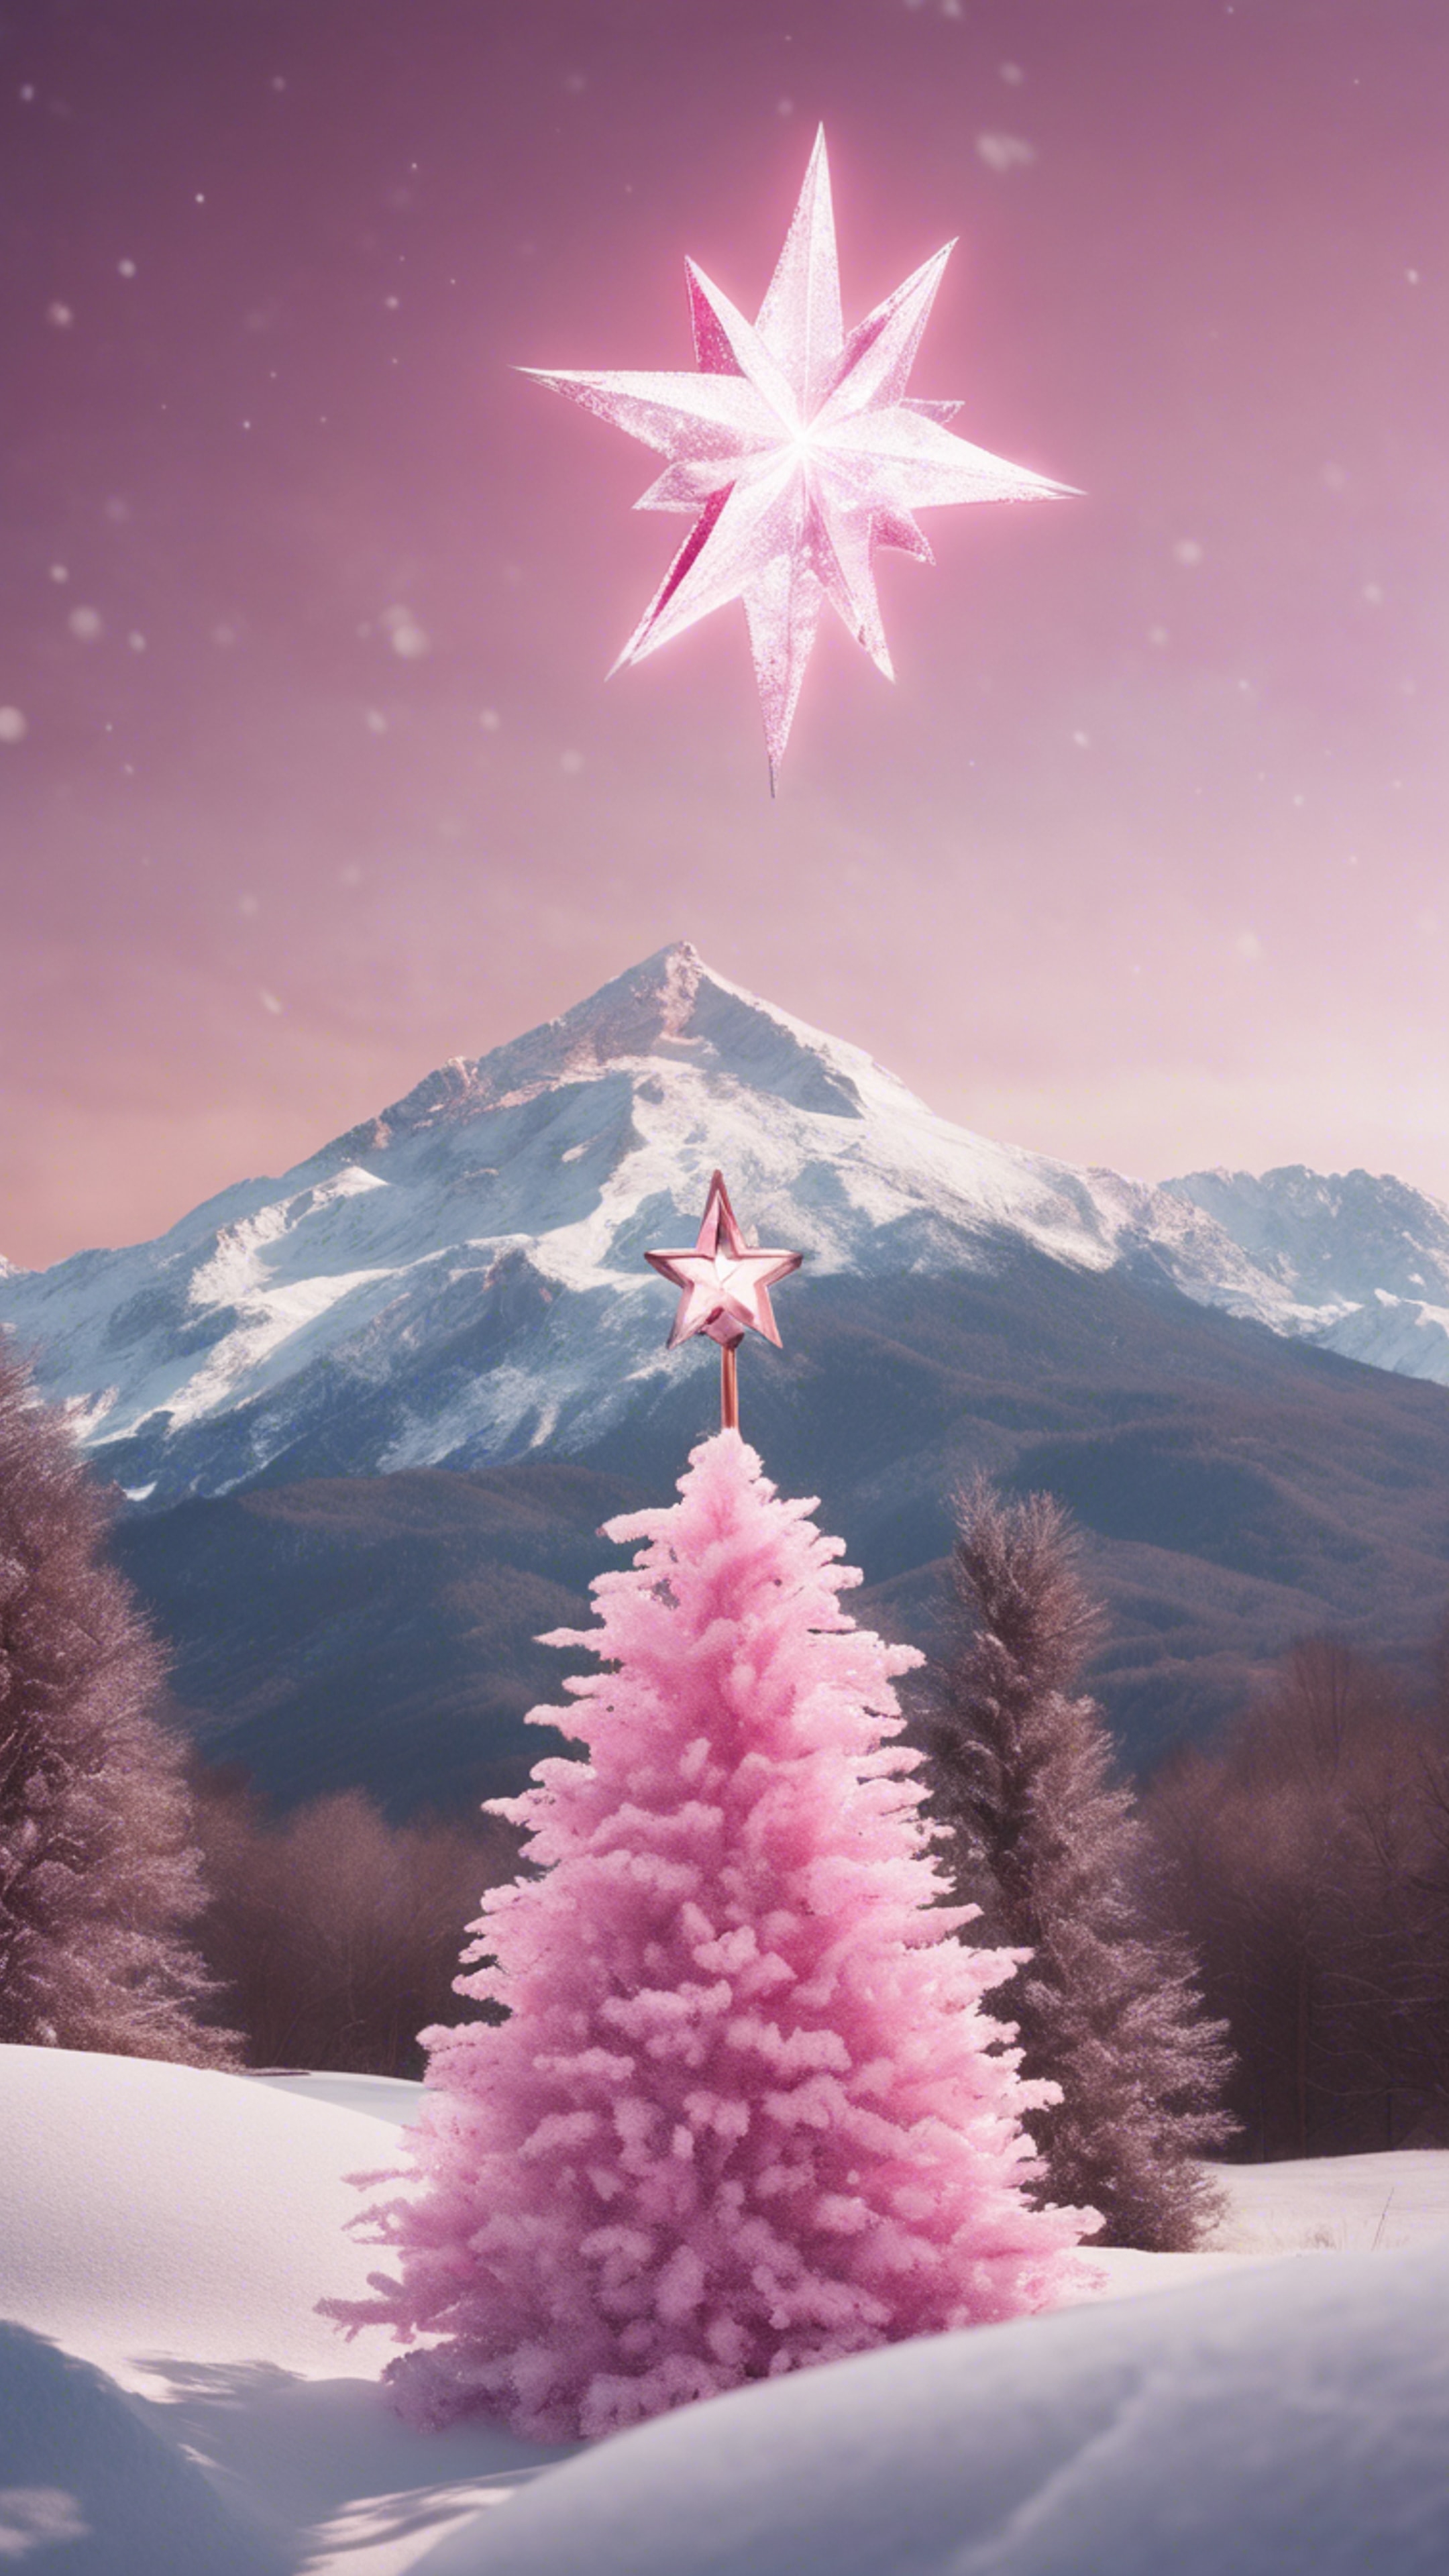 Distant view of a snow-clad mountain with a pink Christmas star shining brightly in the foreground. Sfondo[48430a4d610446a898be]